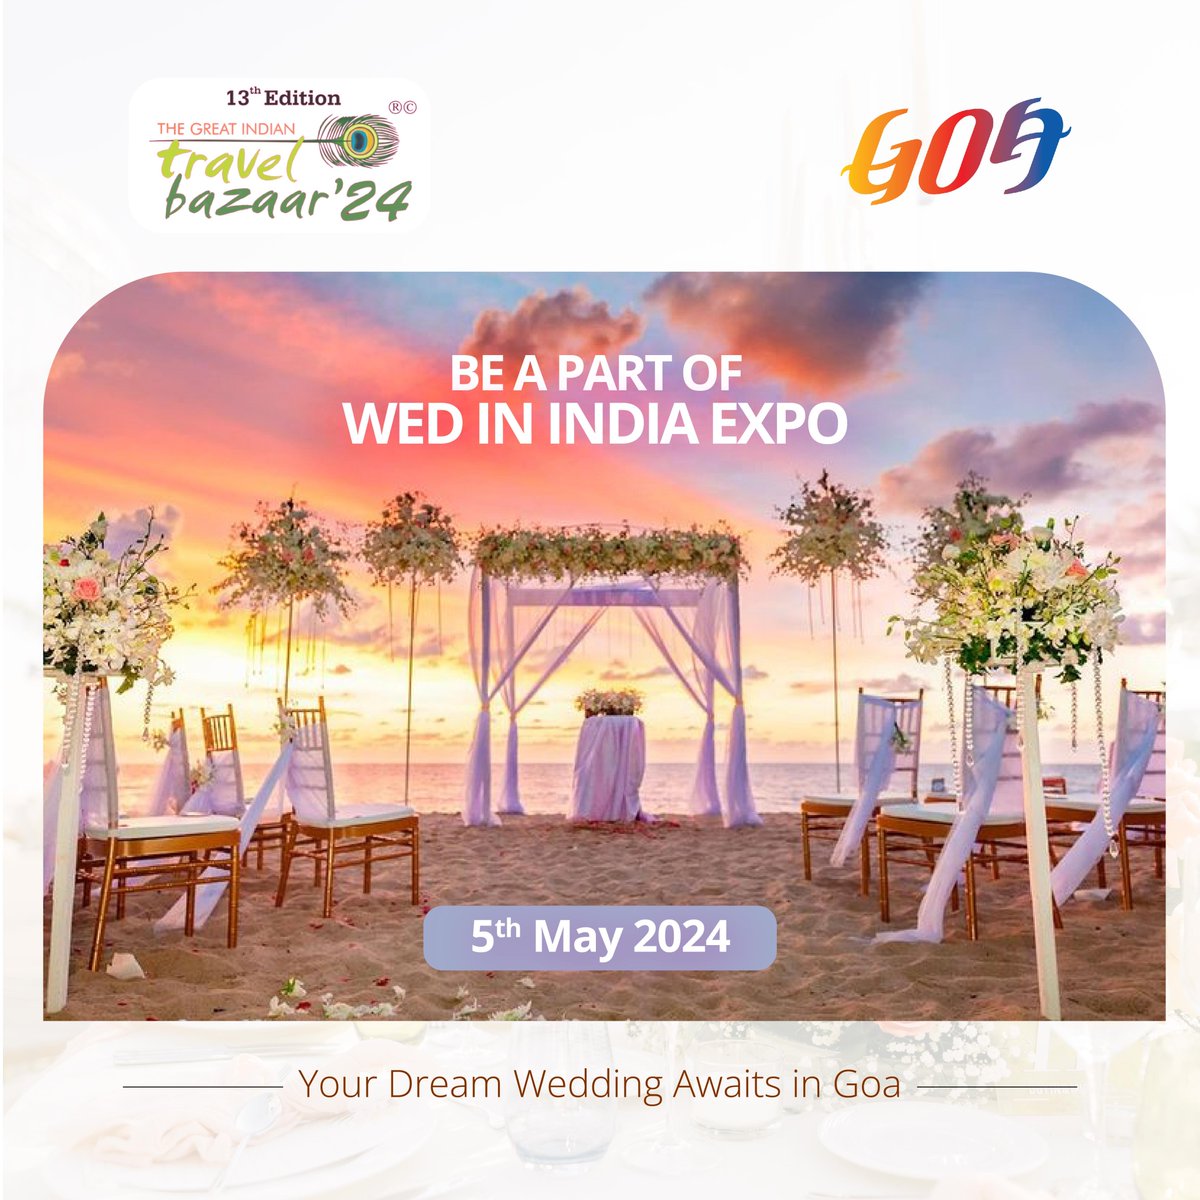 Ready to say 'I Do' to the wedding of your dreams? Join us at the Wed in India Expo on May 5th, 2024, at GITB Jaipur, where 'I Do' meets 'Happily Ever After'!

#GoaTourism #RegenerativeTourismGoa #GoaBeyondBeaches #GITB #GITBJaipur #GITB2024 #WedinIndia #WedInGoa #Goa